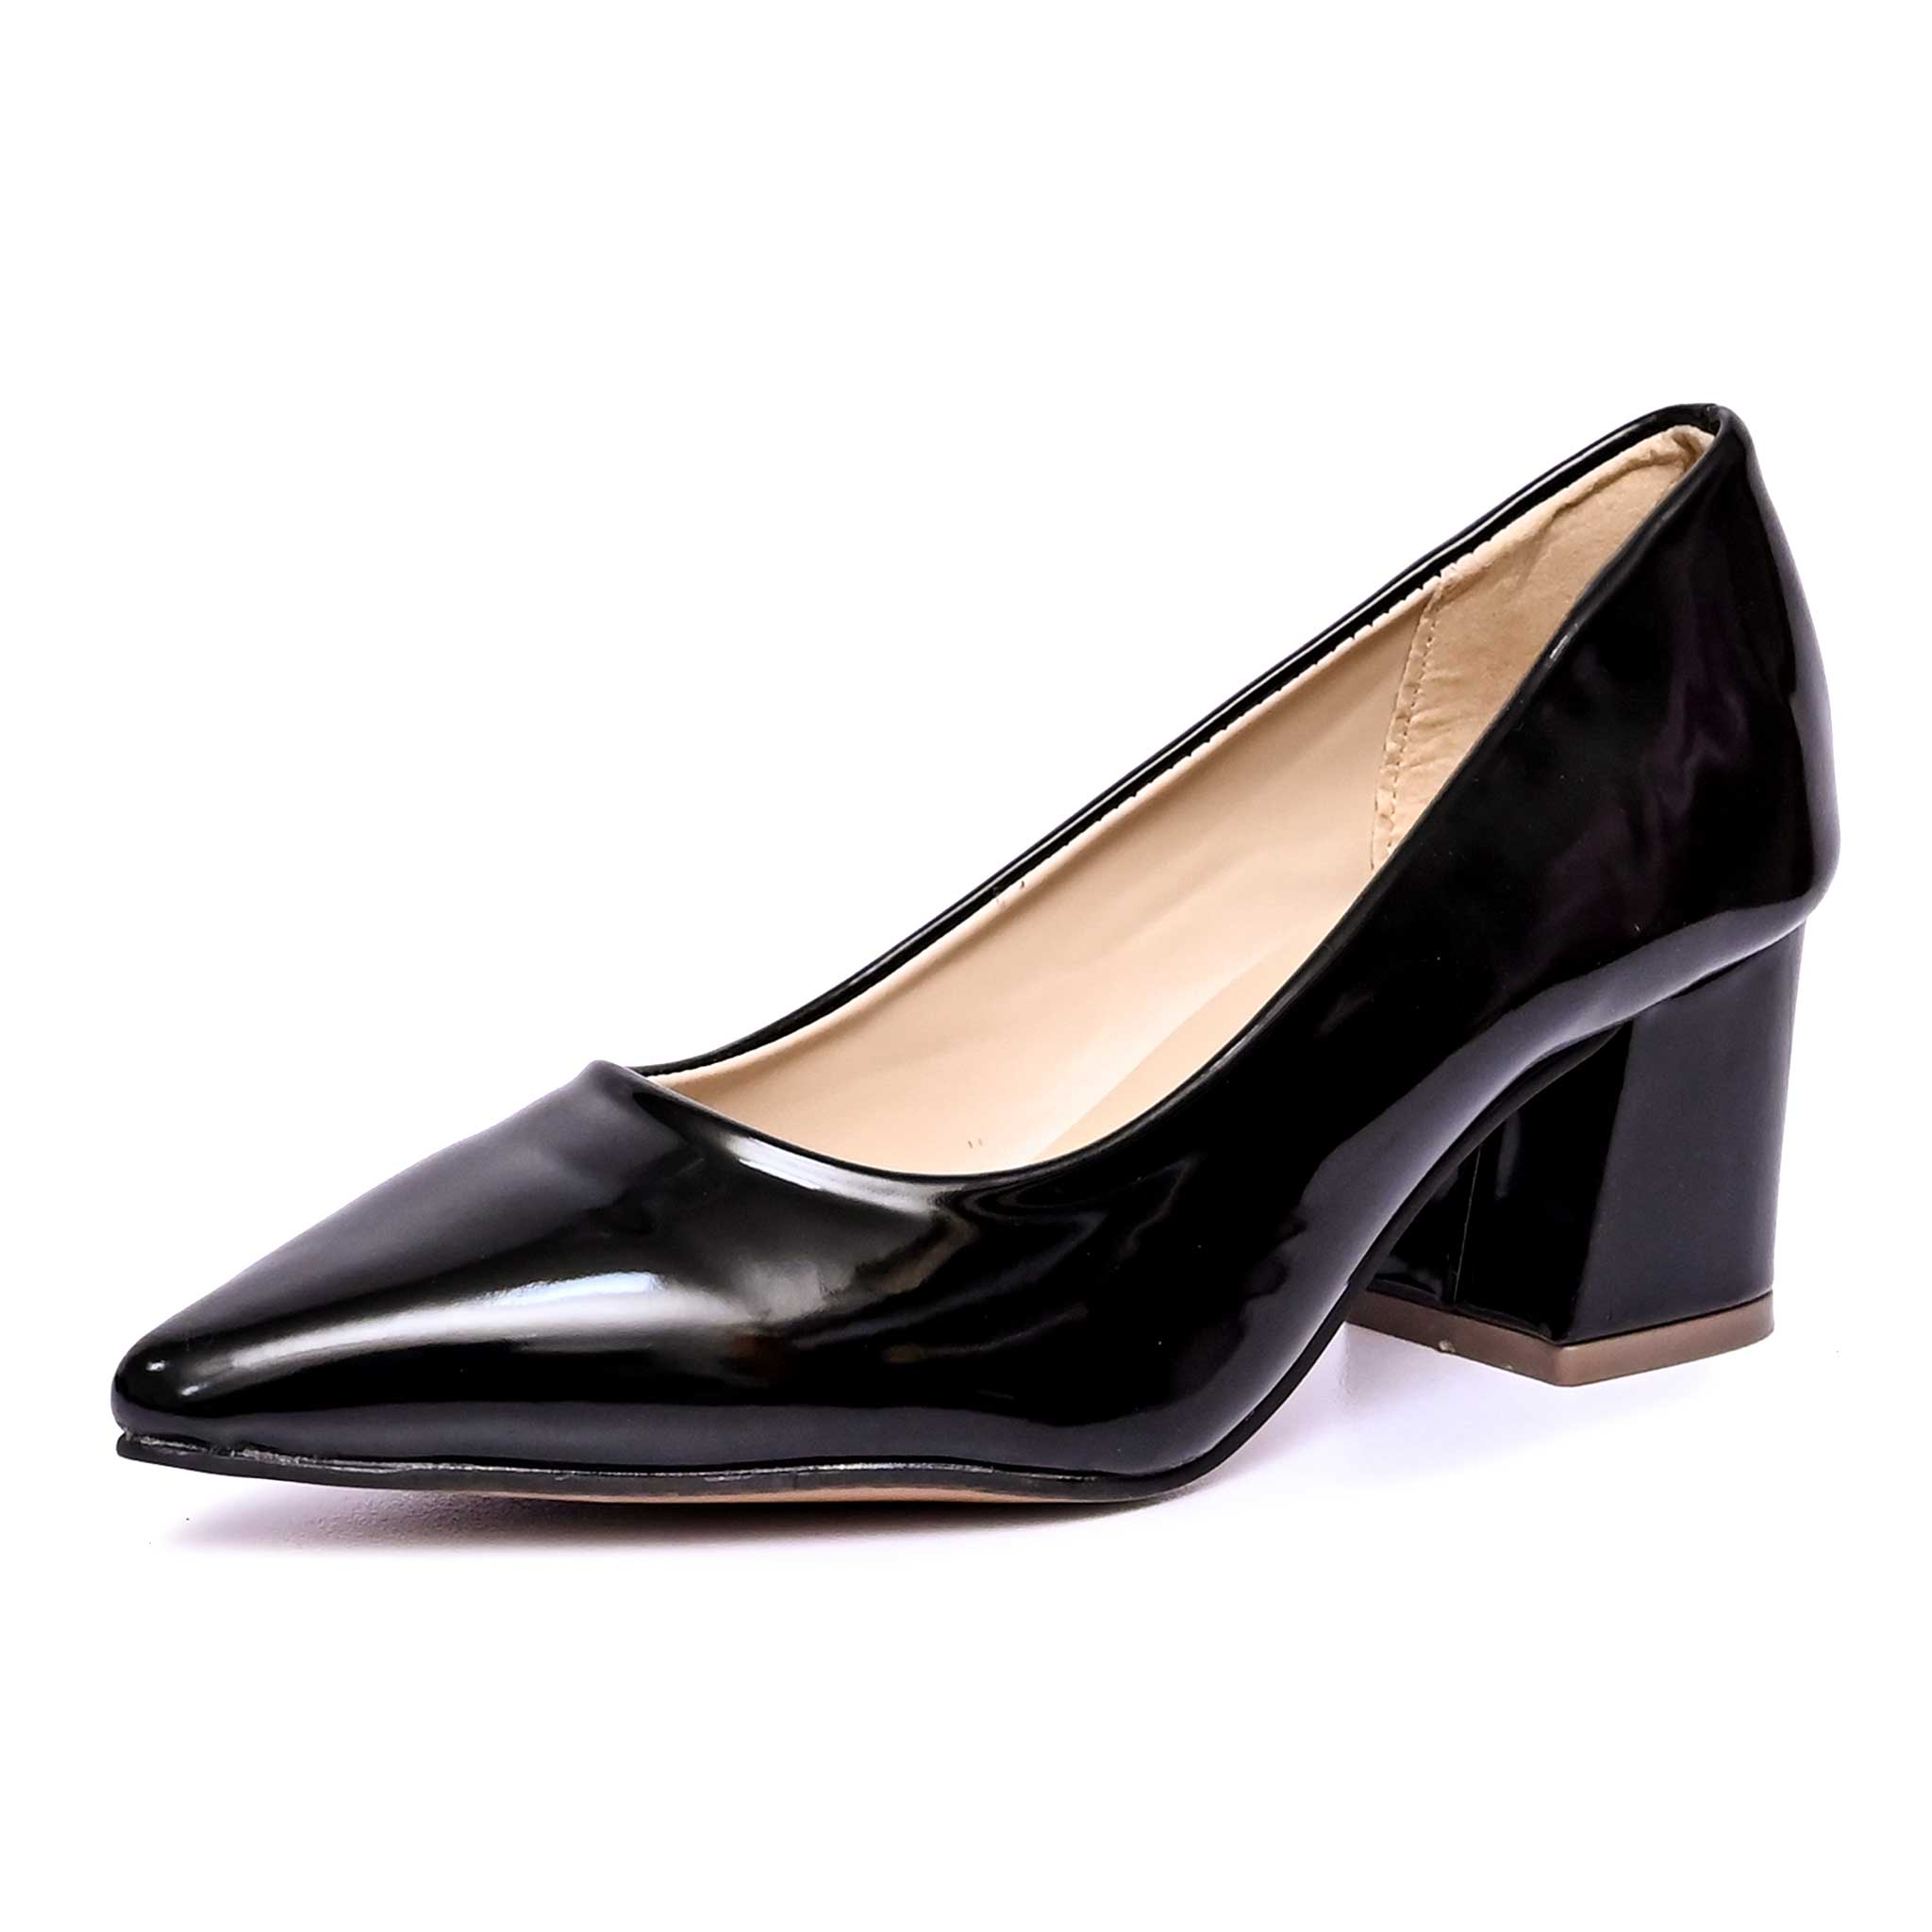 Court Shoes For Women - Metro-10900458